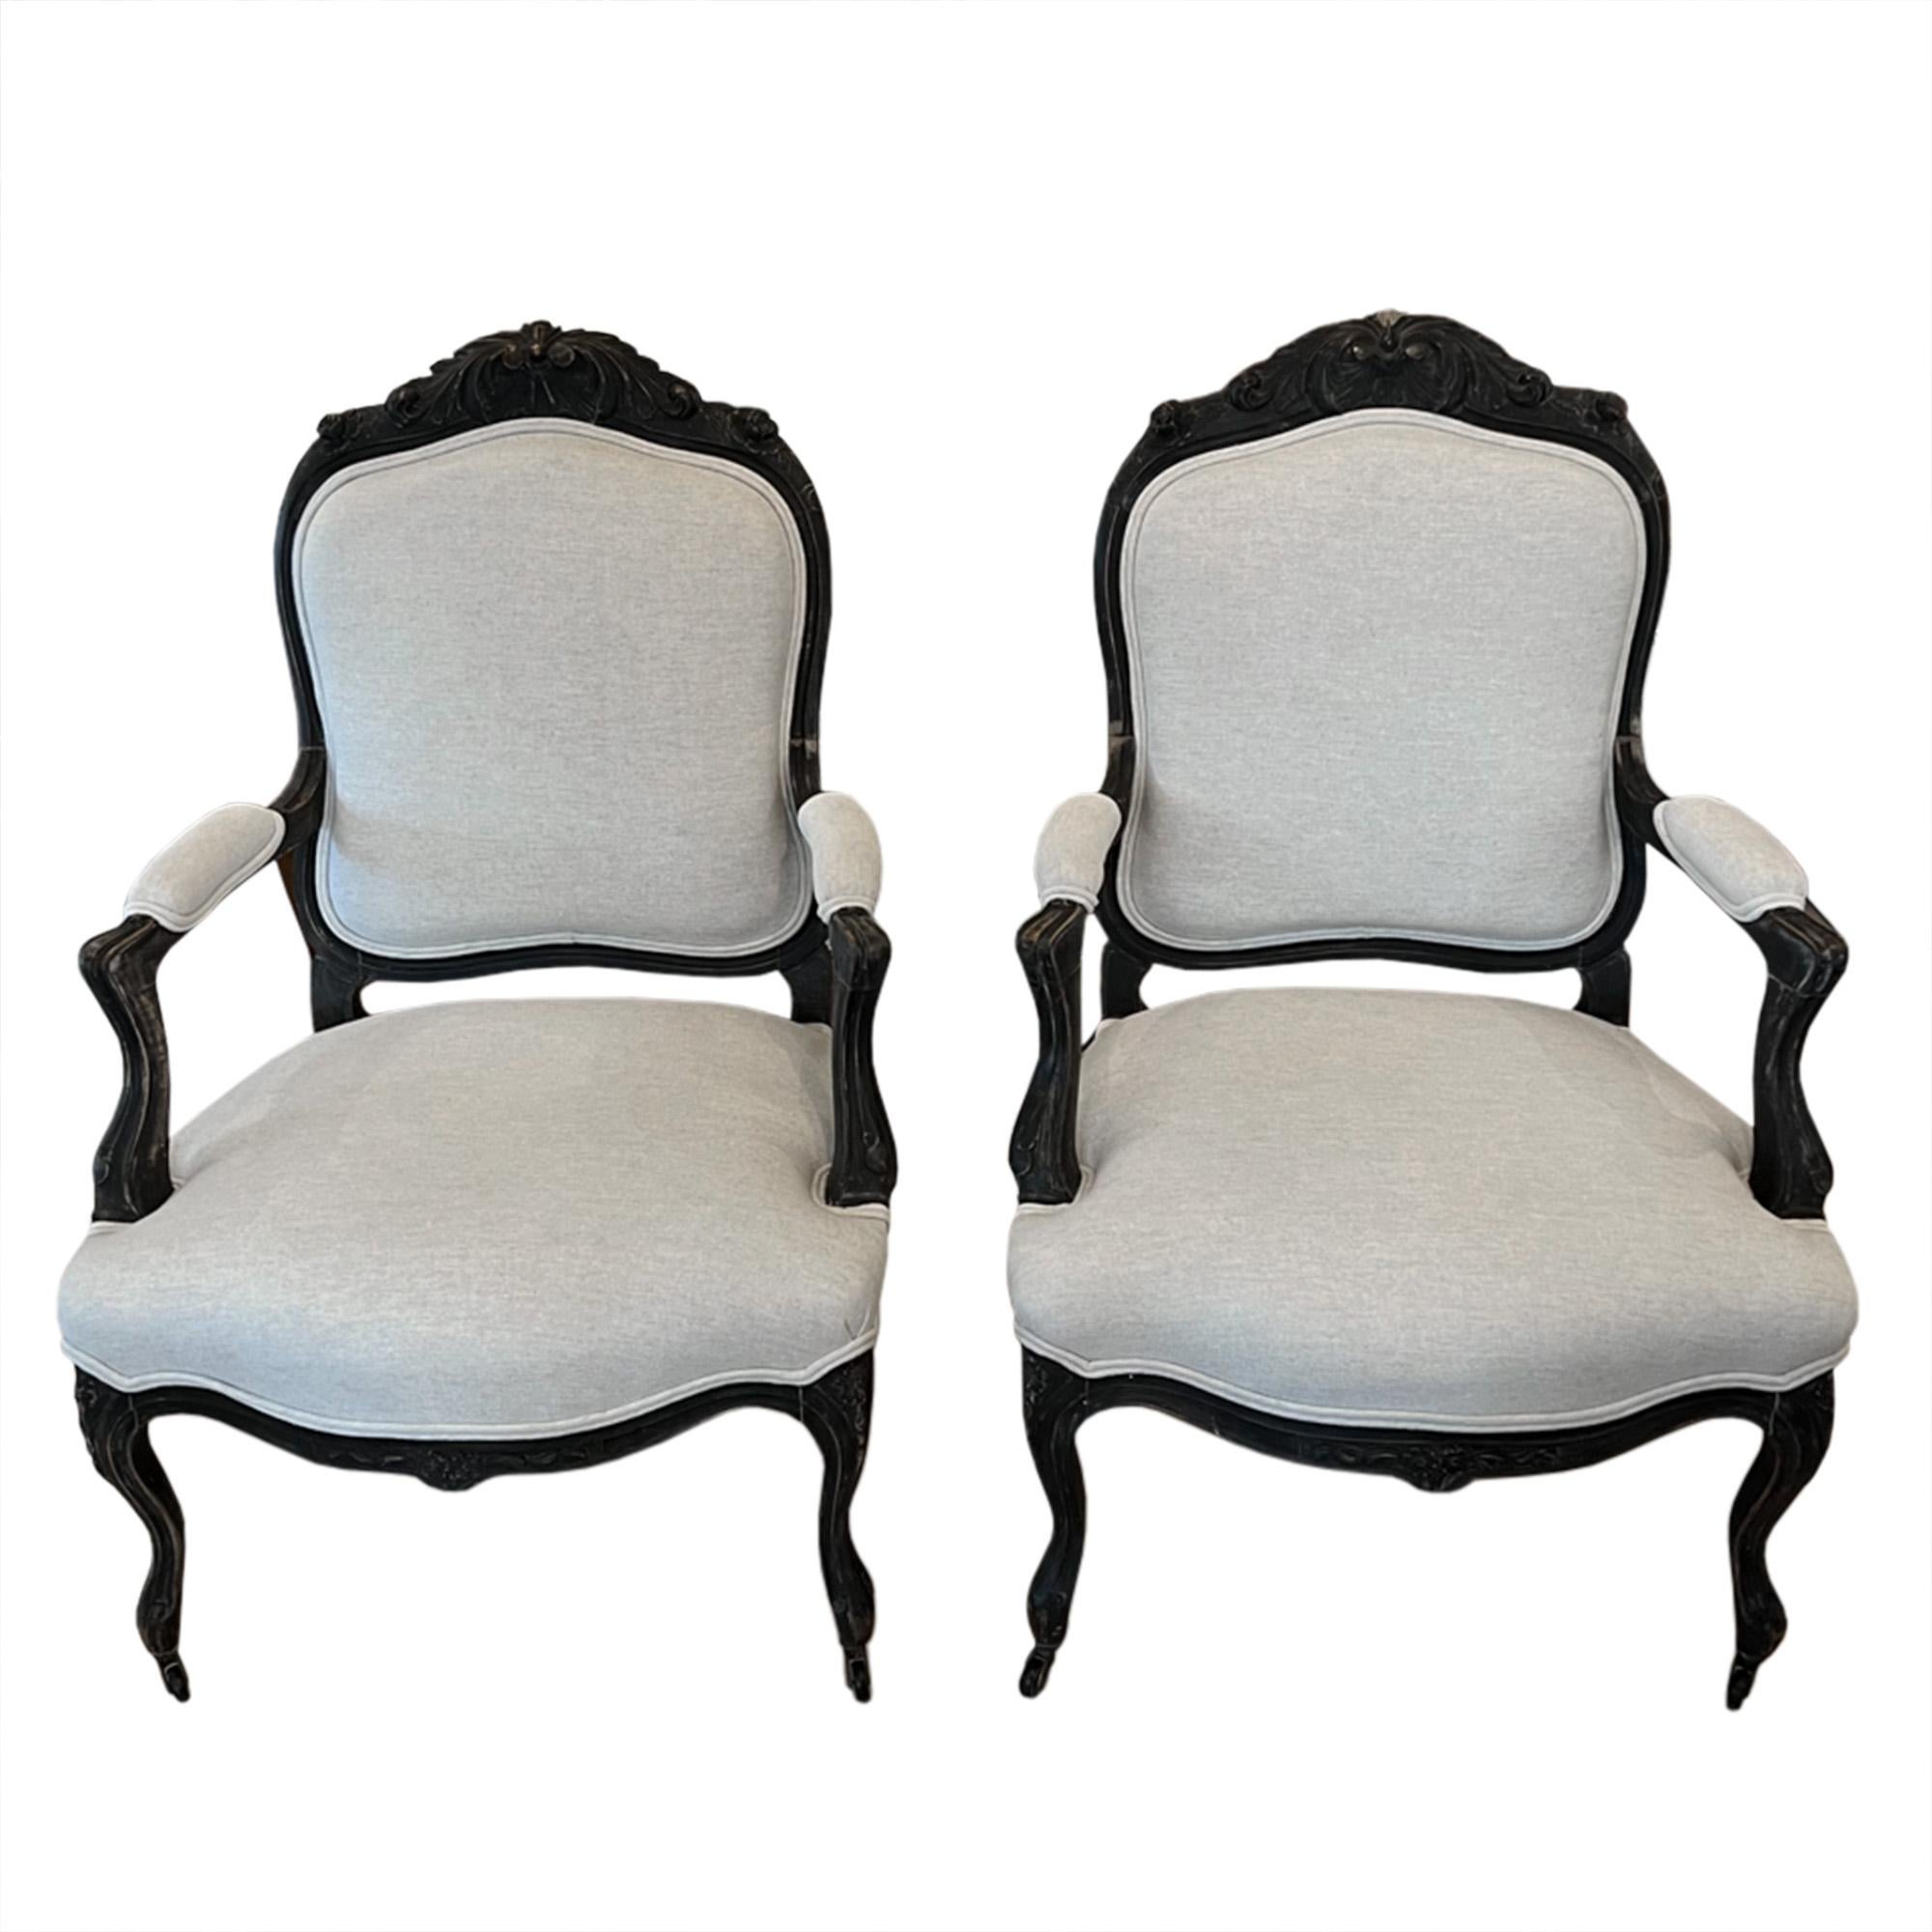 A beautiful pair of carved 19th century French salon chairs with original paint and castors to the front feet. 

We've had them upholstered in a light Mark Alexander linen.

A great pair of decorative antique chairs.